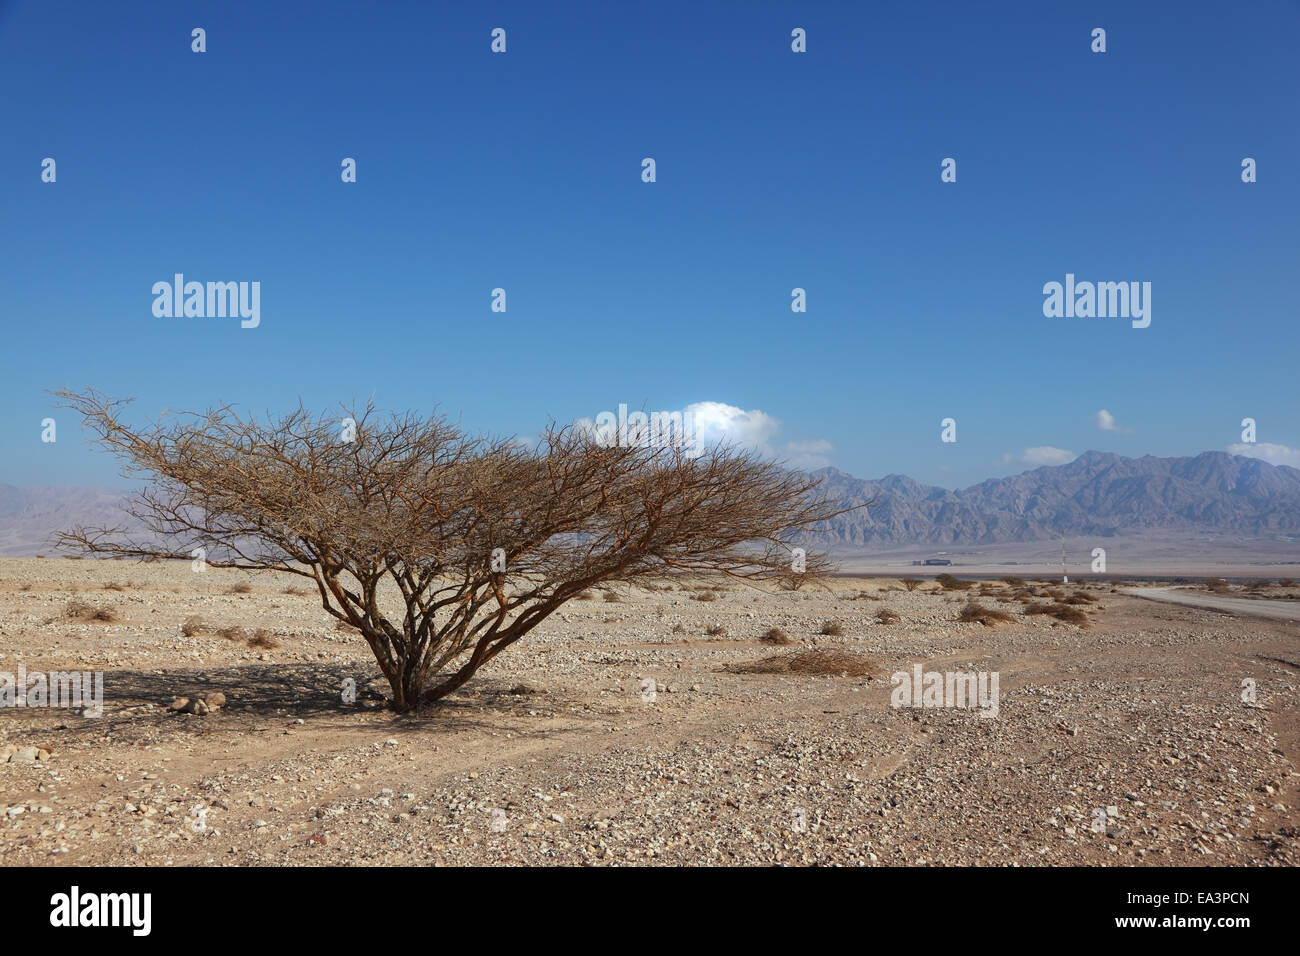 Lonely tree in desert Banque D'Images